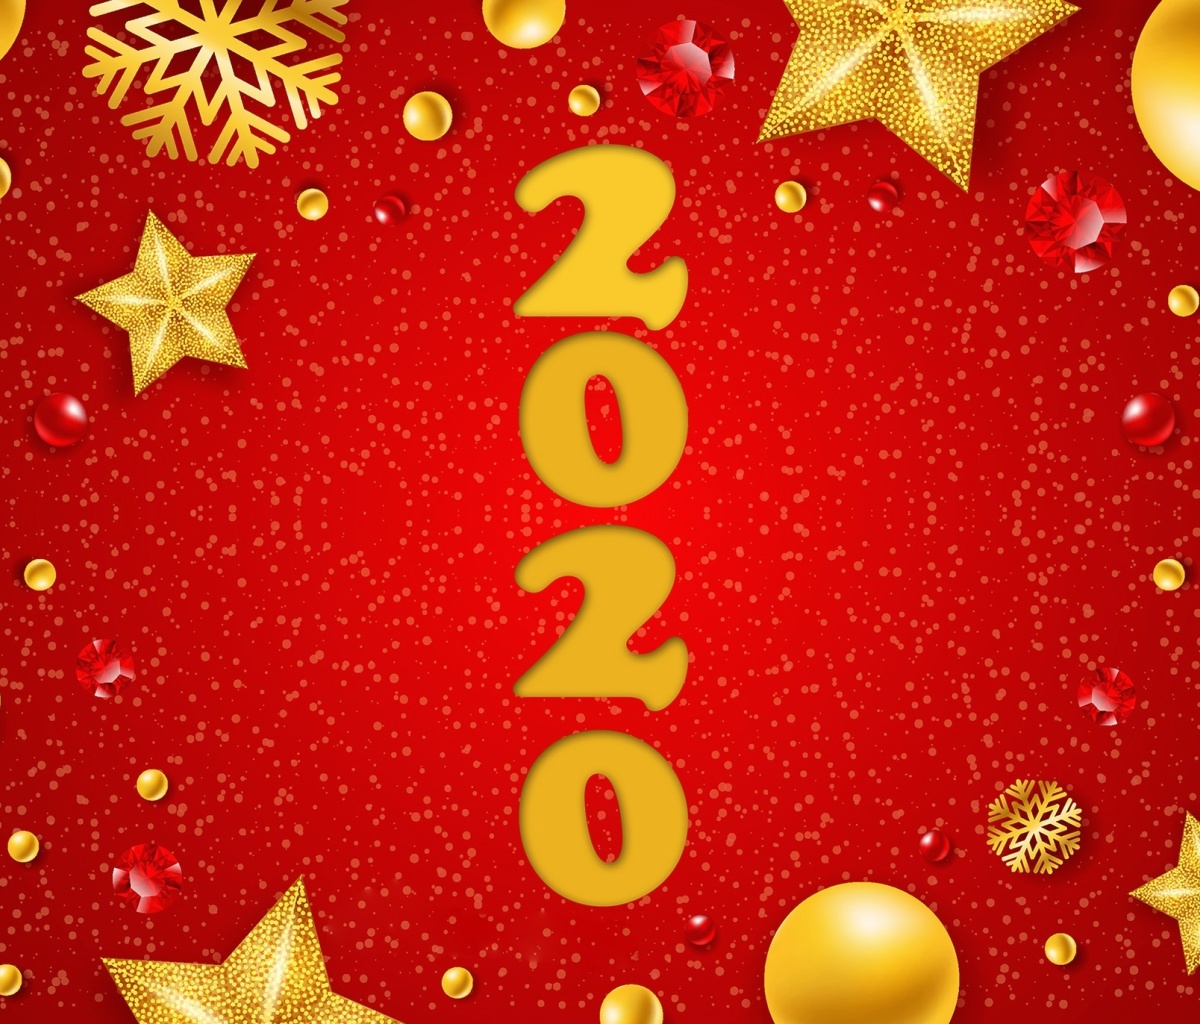 Happy New Year 2020 Messages wallpaper 1200x1024